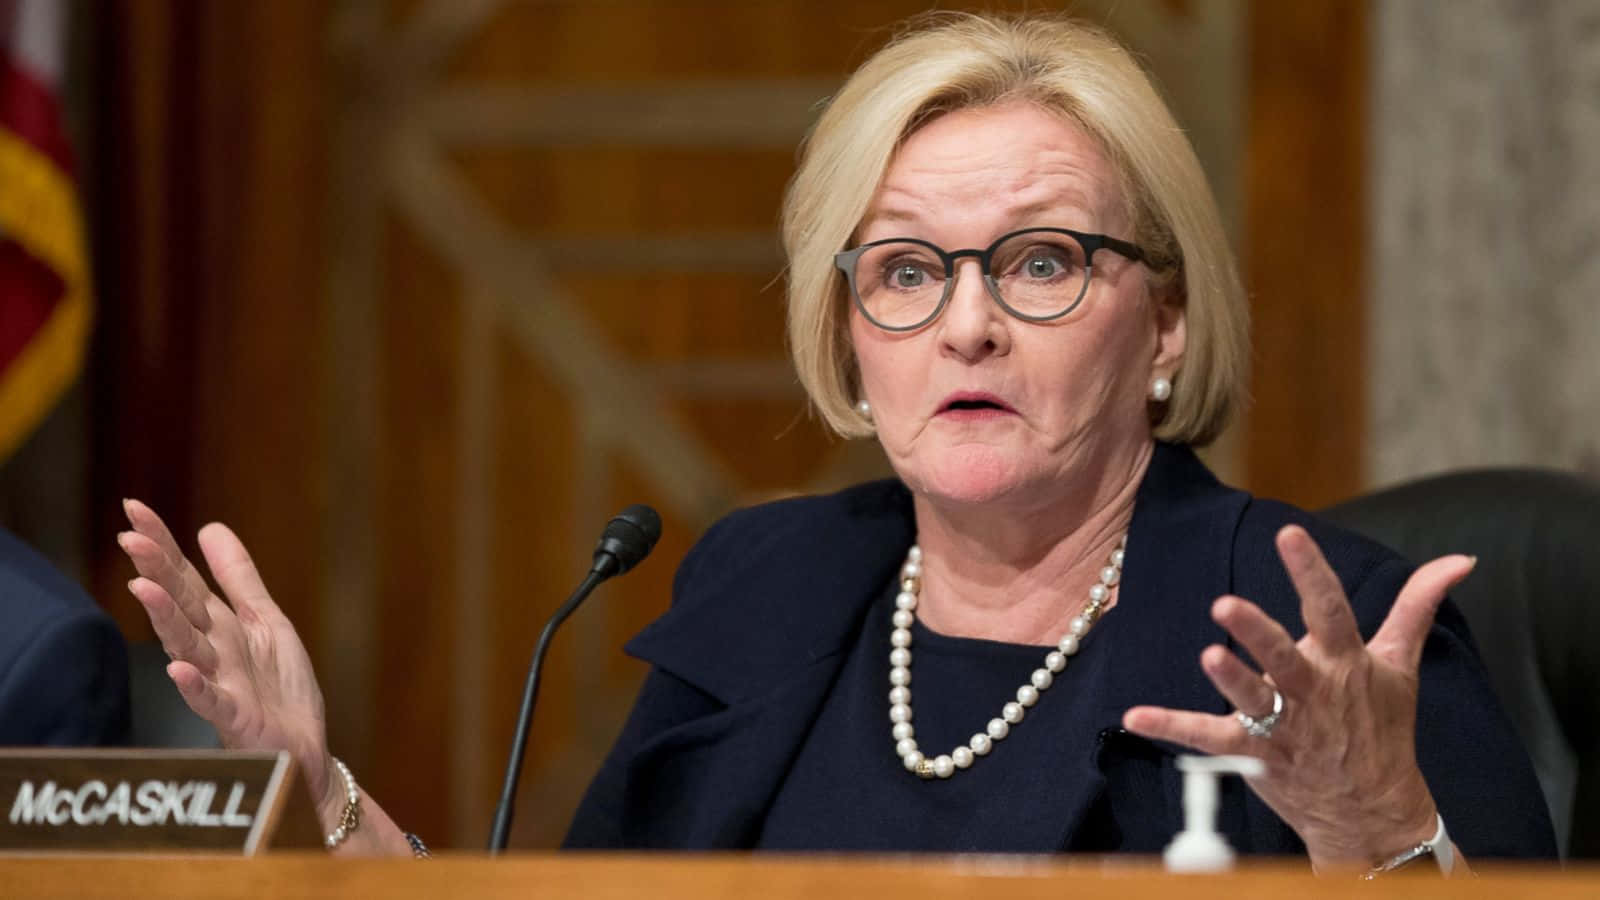 Claire Mccaskill With Open Palms Wallpaper